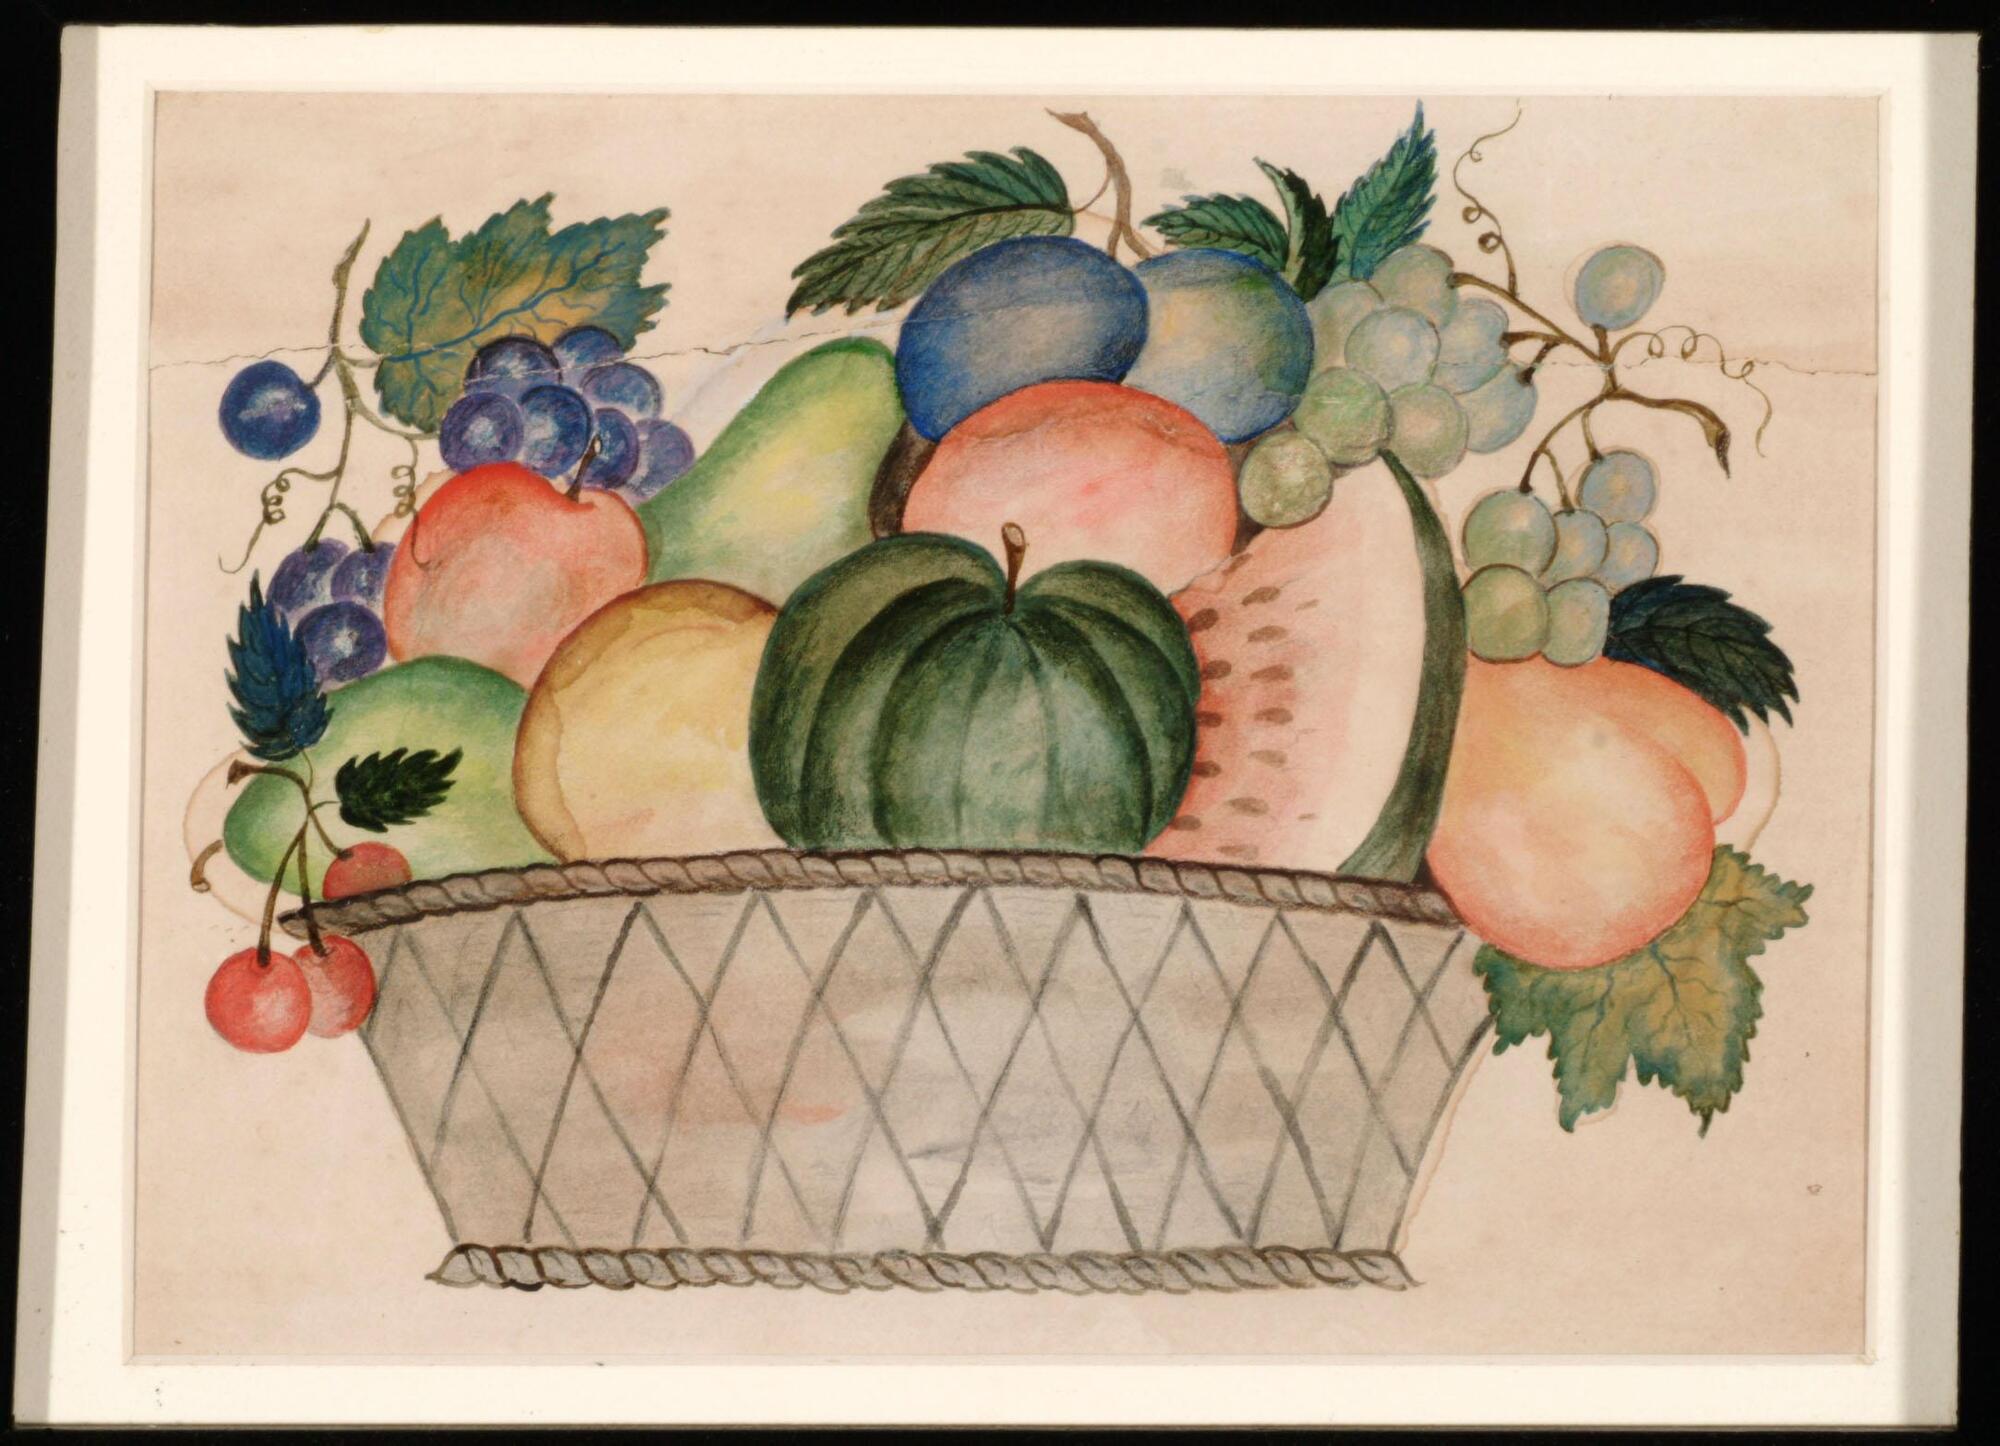 A gray basket containing a composition of produce including a sliced watermelon, a whole green pumpkin, peaches, cherries, grapes, pears, and plums.